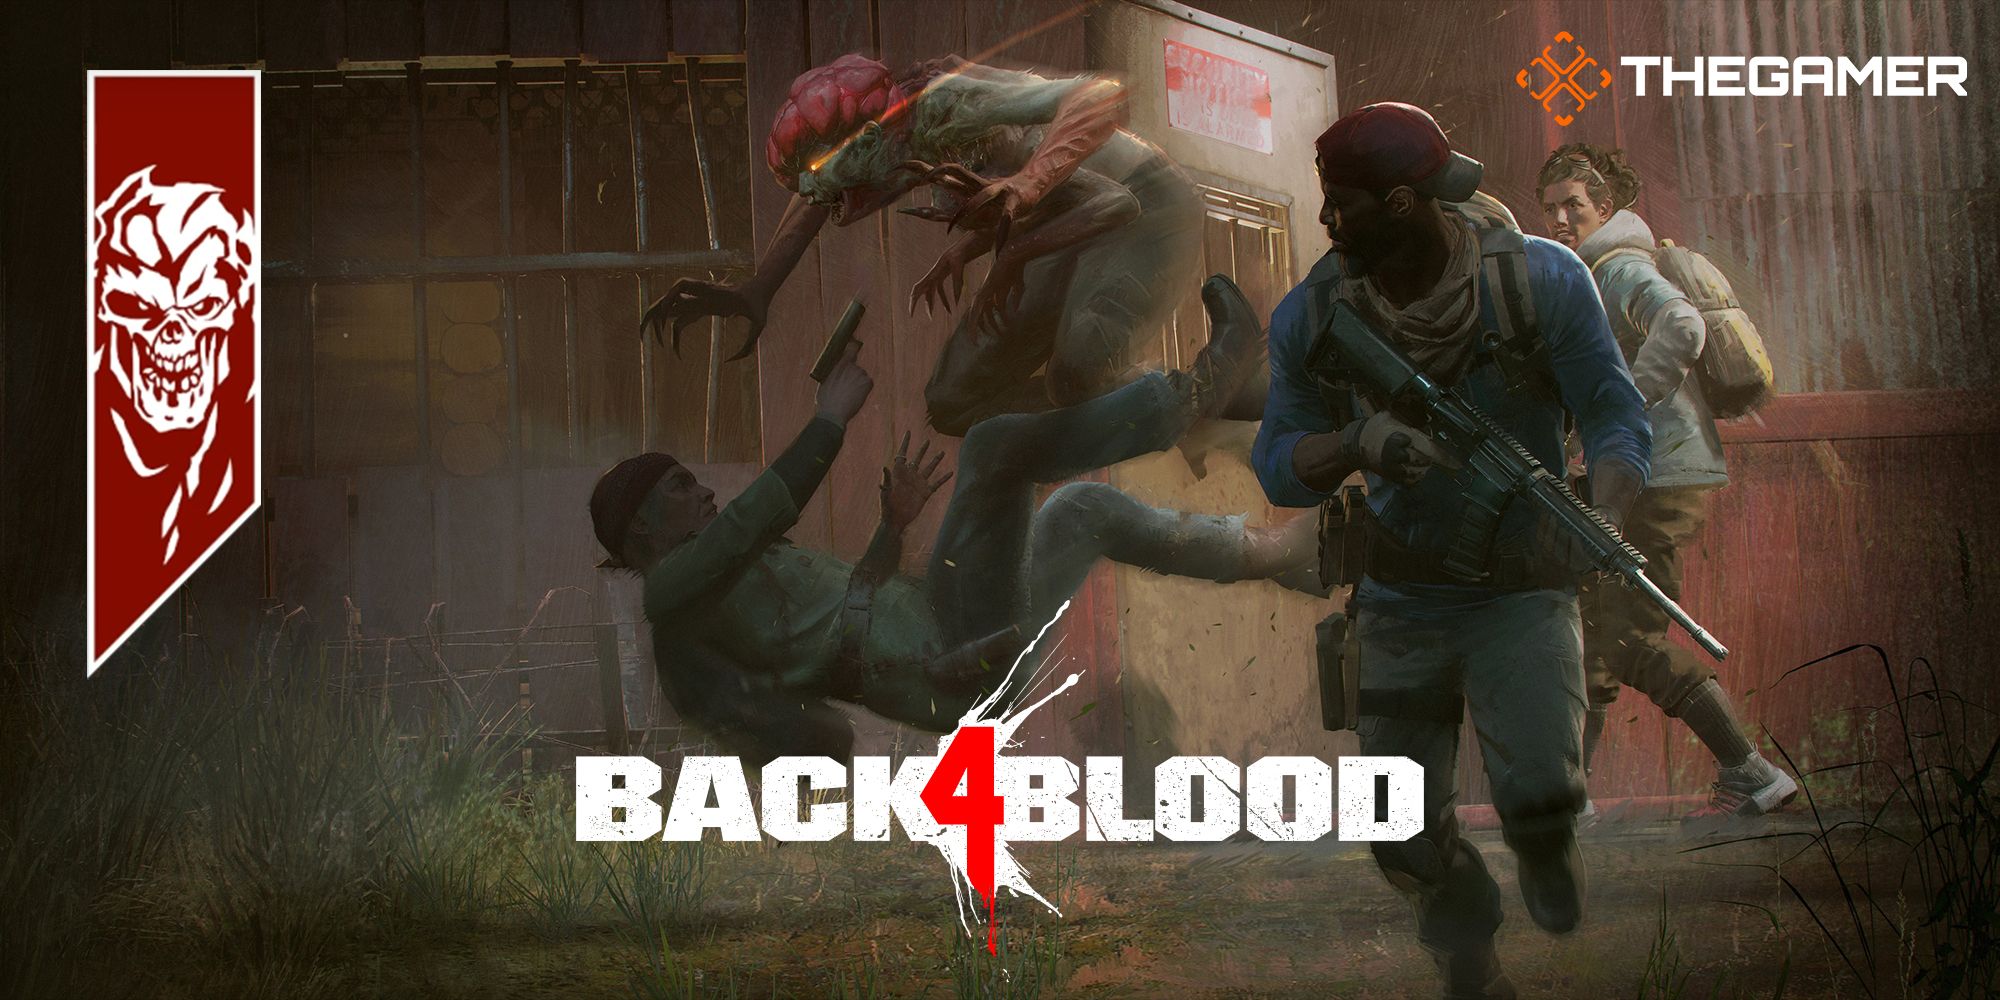 Back 4 Blood Open Beta Impressions - Being a Ridden Ain't Half Bad